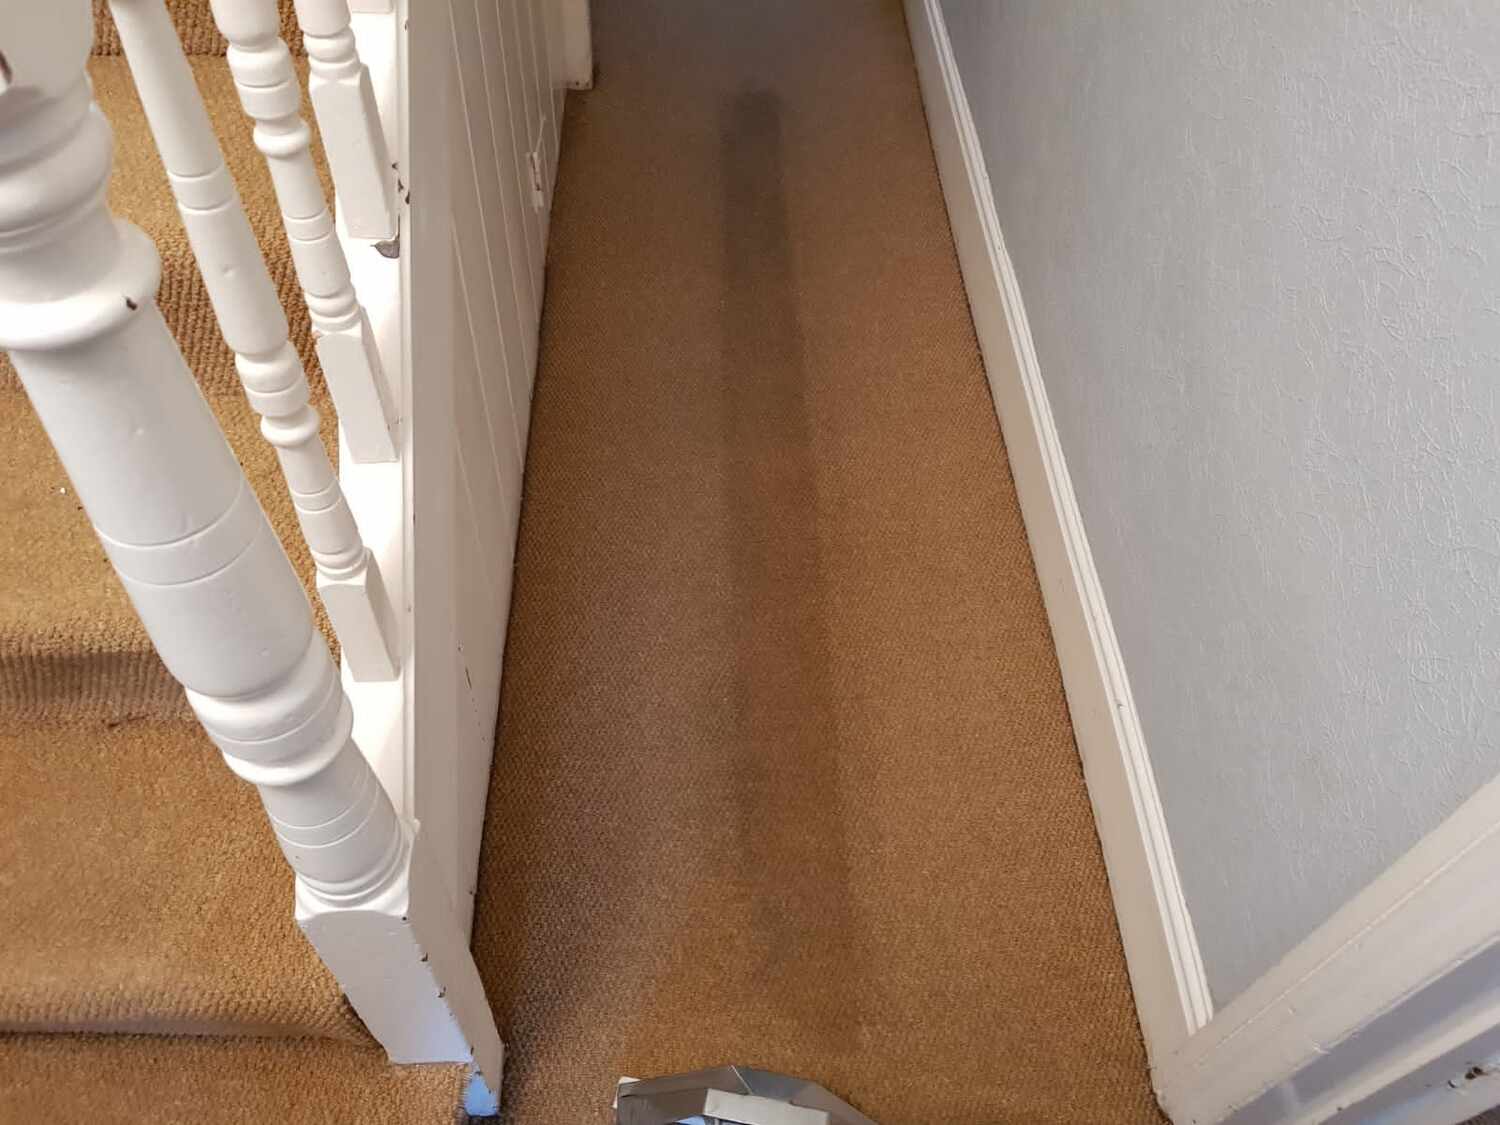 Stair carpet being cleaned